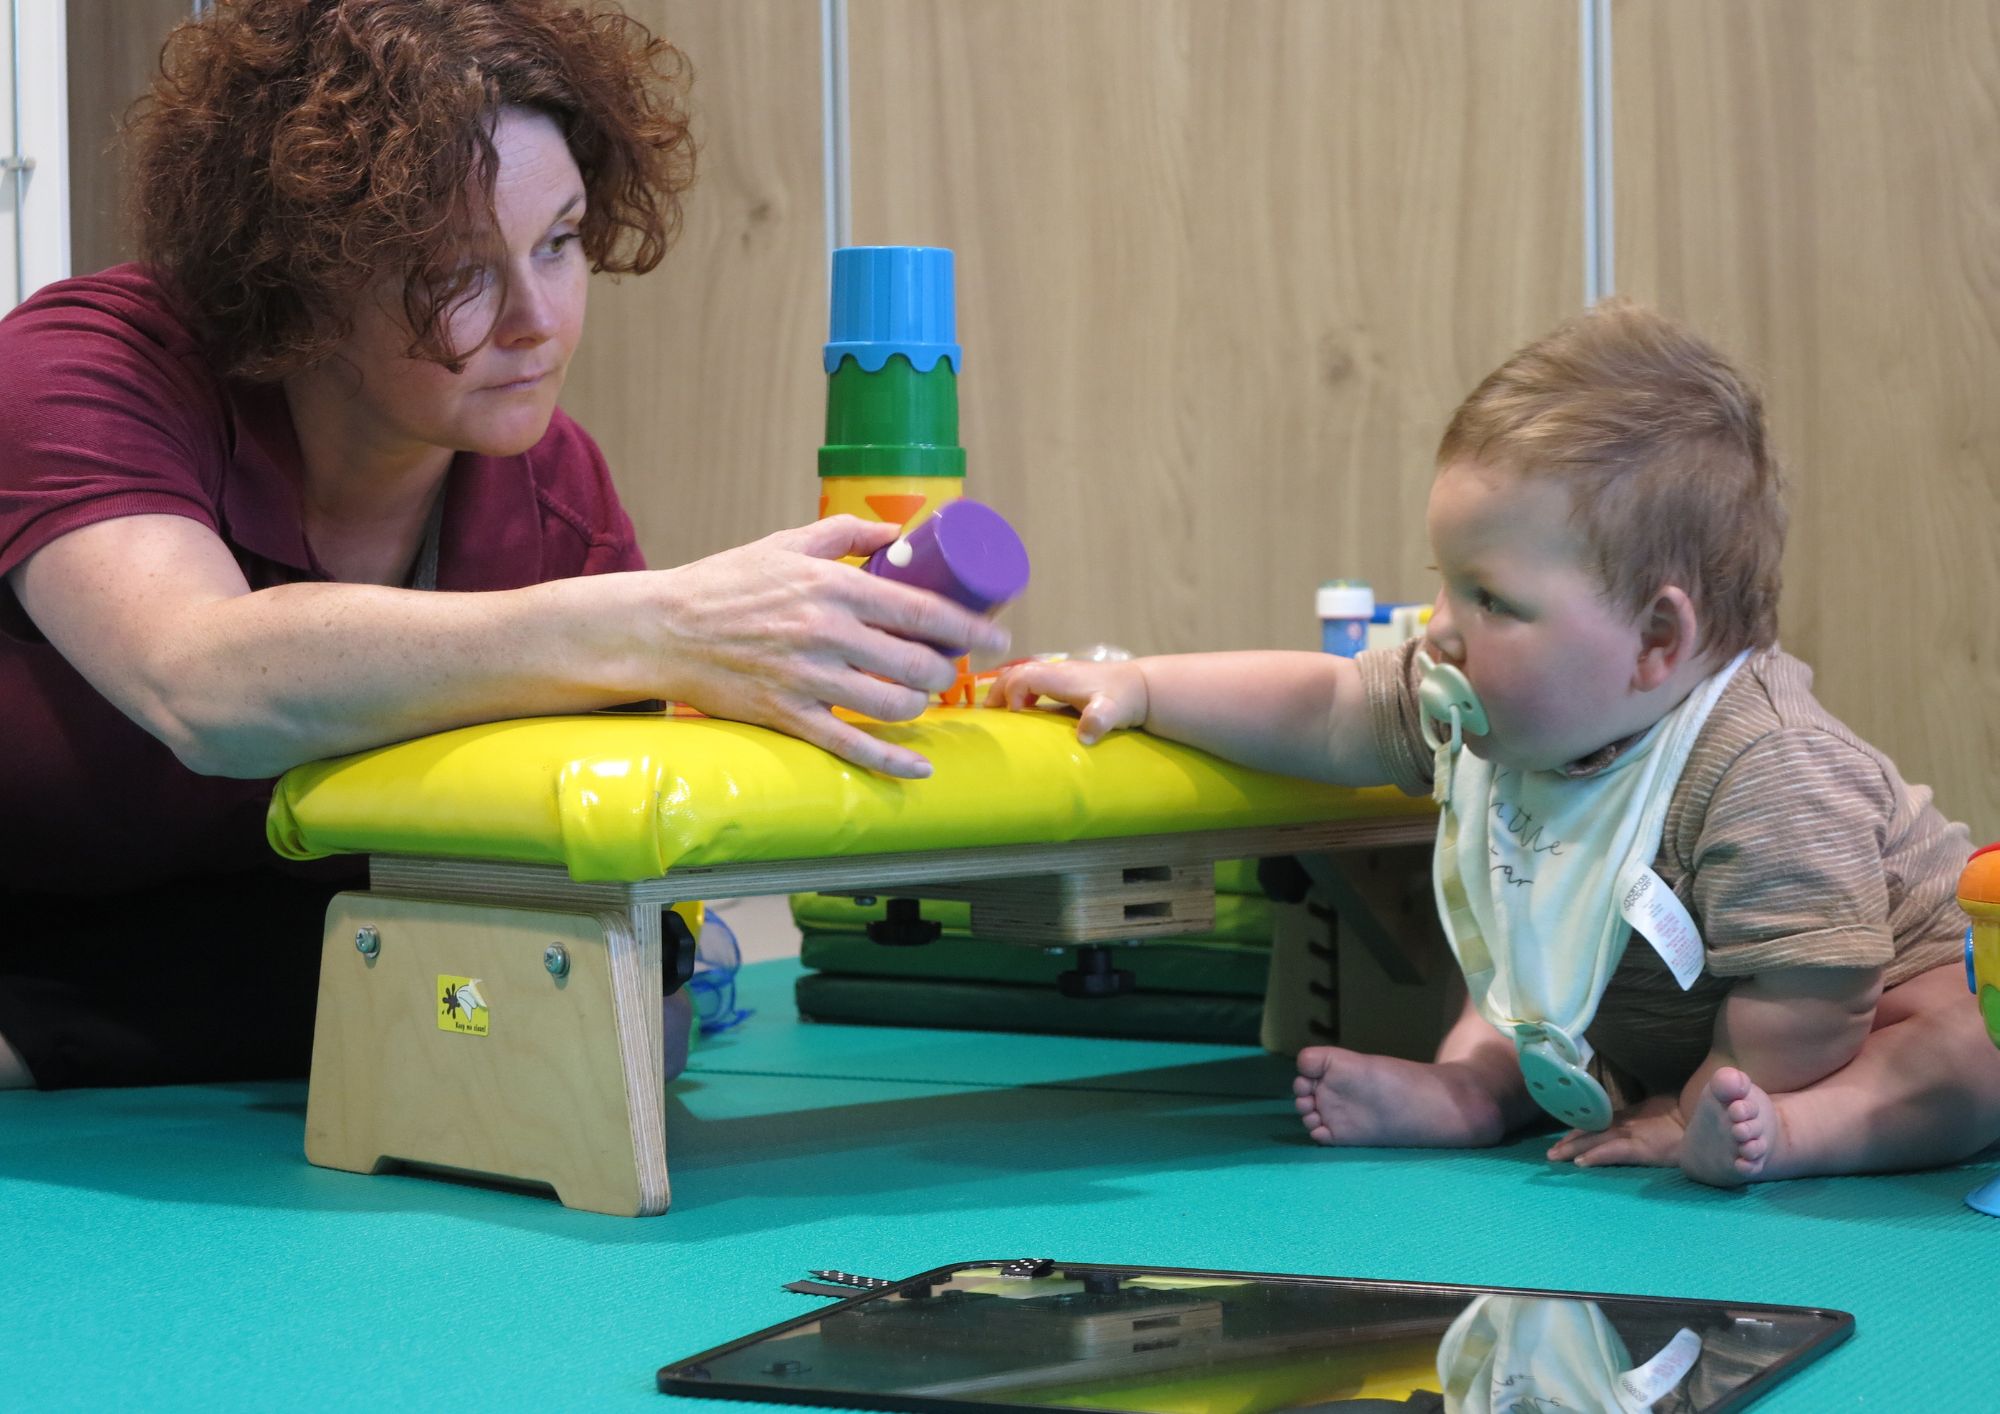 a baby reaching for a toy using a yellow therapy bench